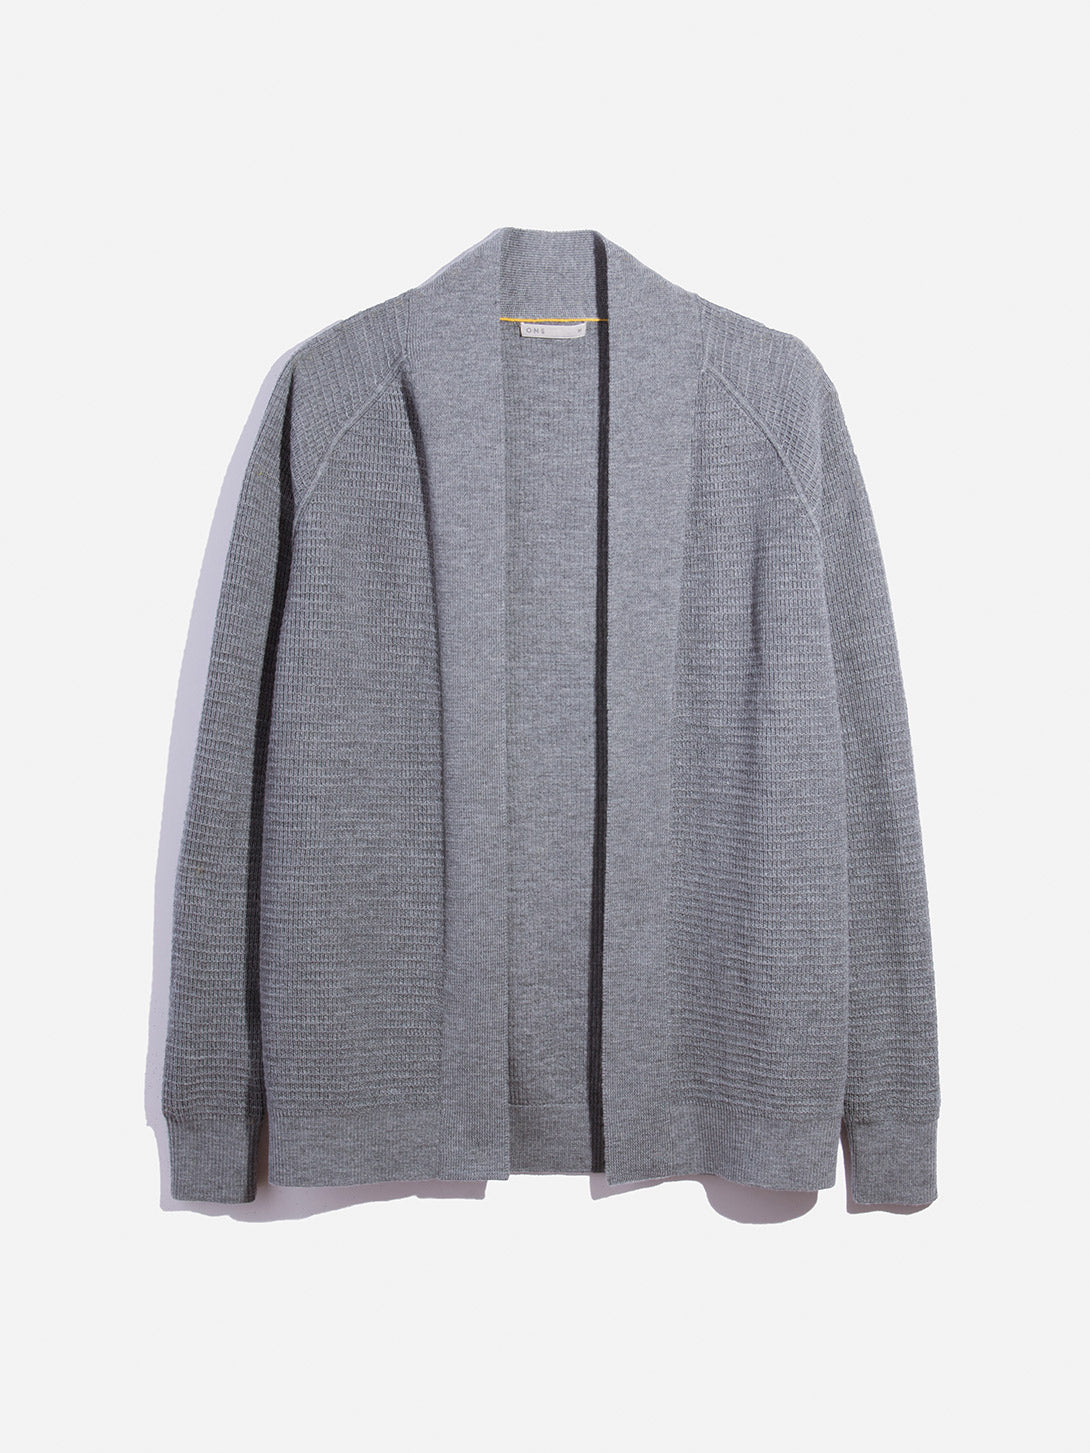 HEATHER GREY sweaters for men byron open cardigan ons clothing